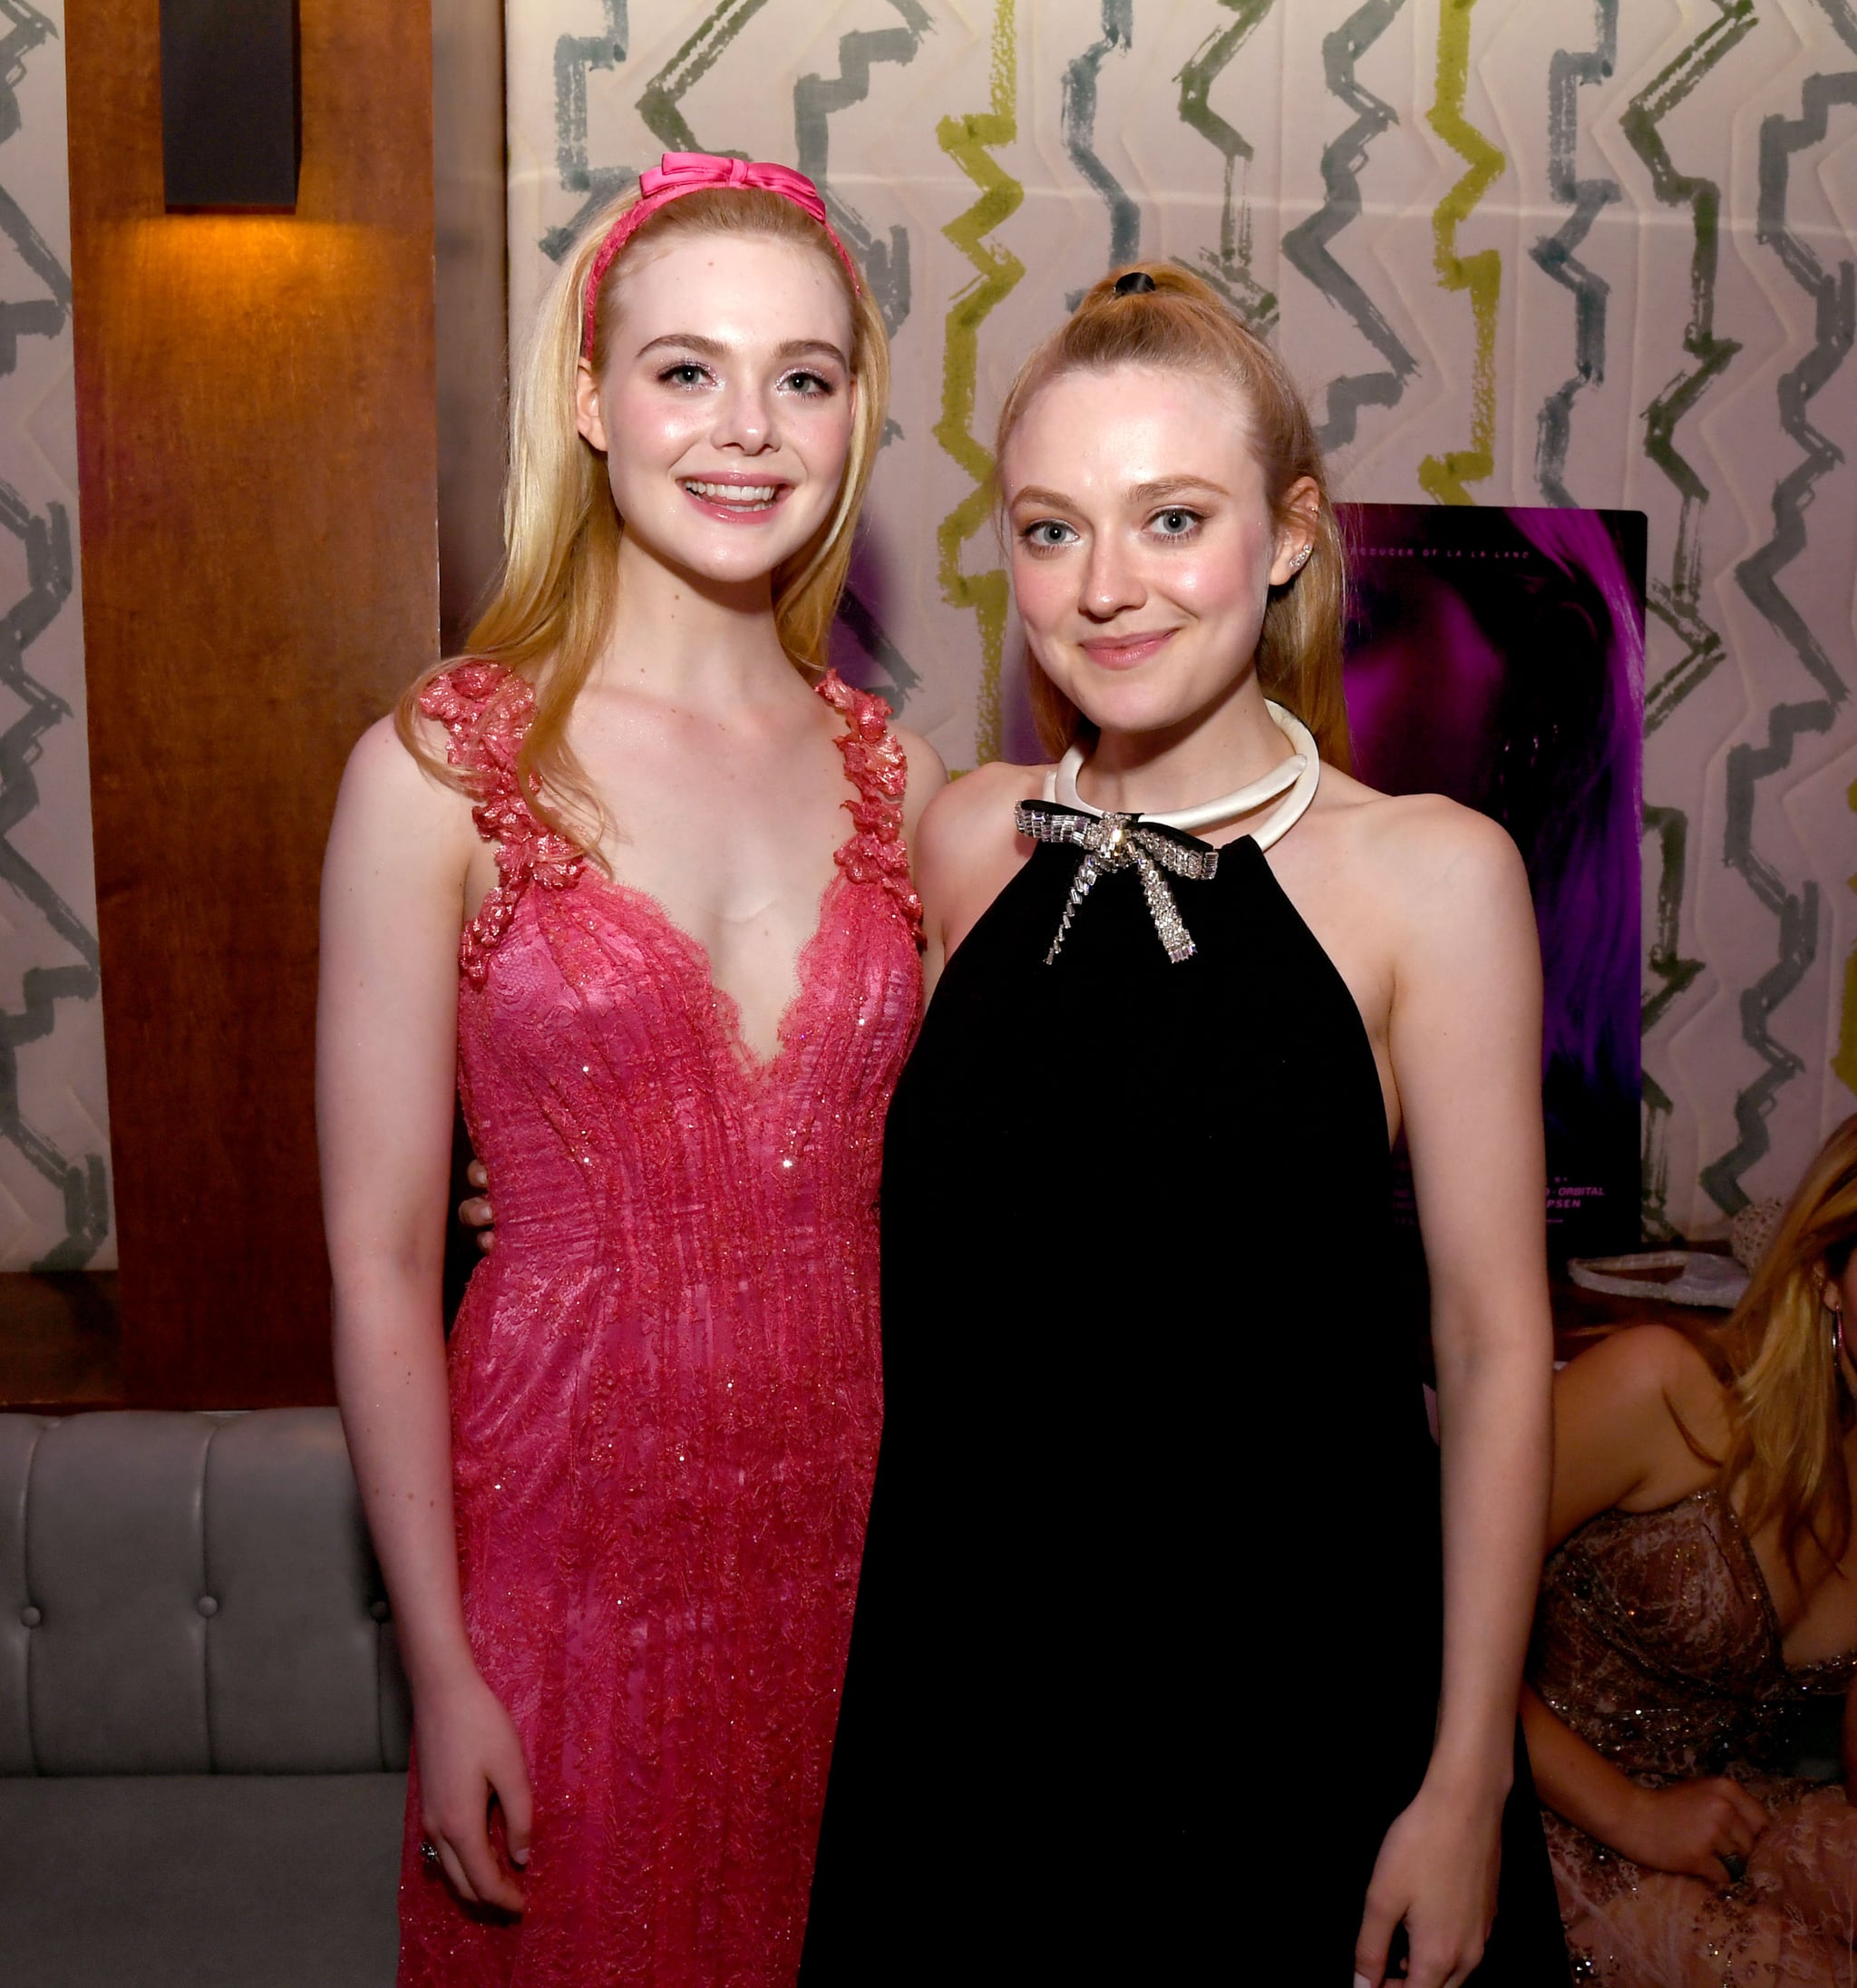 HOLLYWOOD, CALIFORNIA - APRIL 02: Elle Fanning (L) and Dakota Fanning pose at the after party for a special screening of Bleeker Street